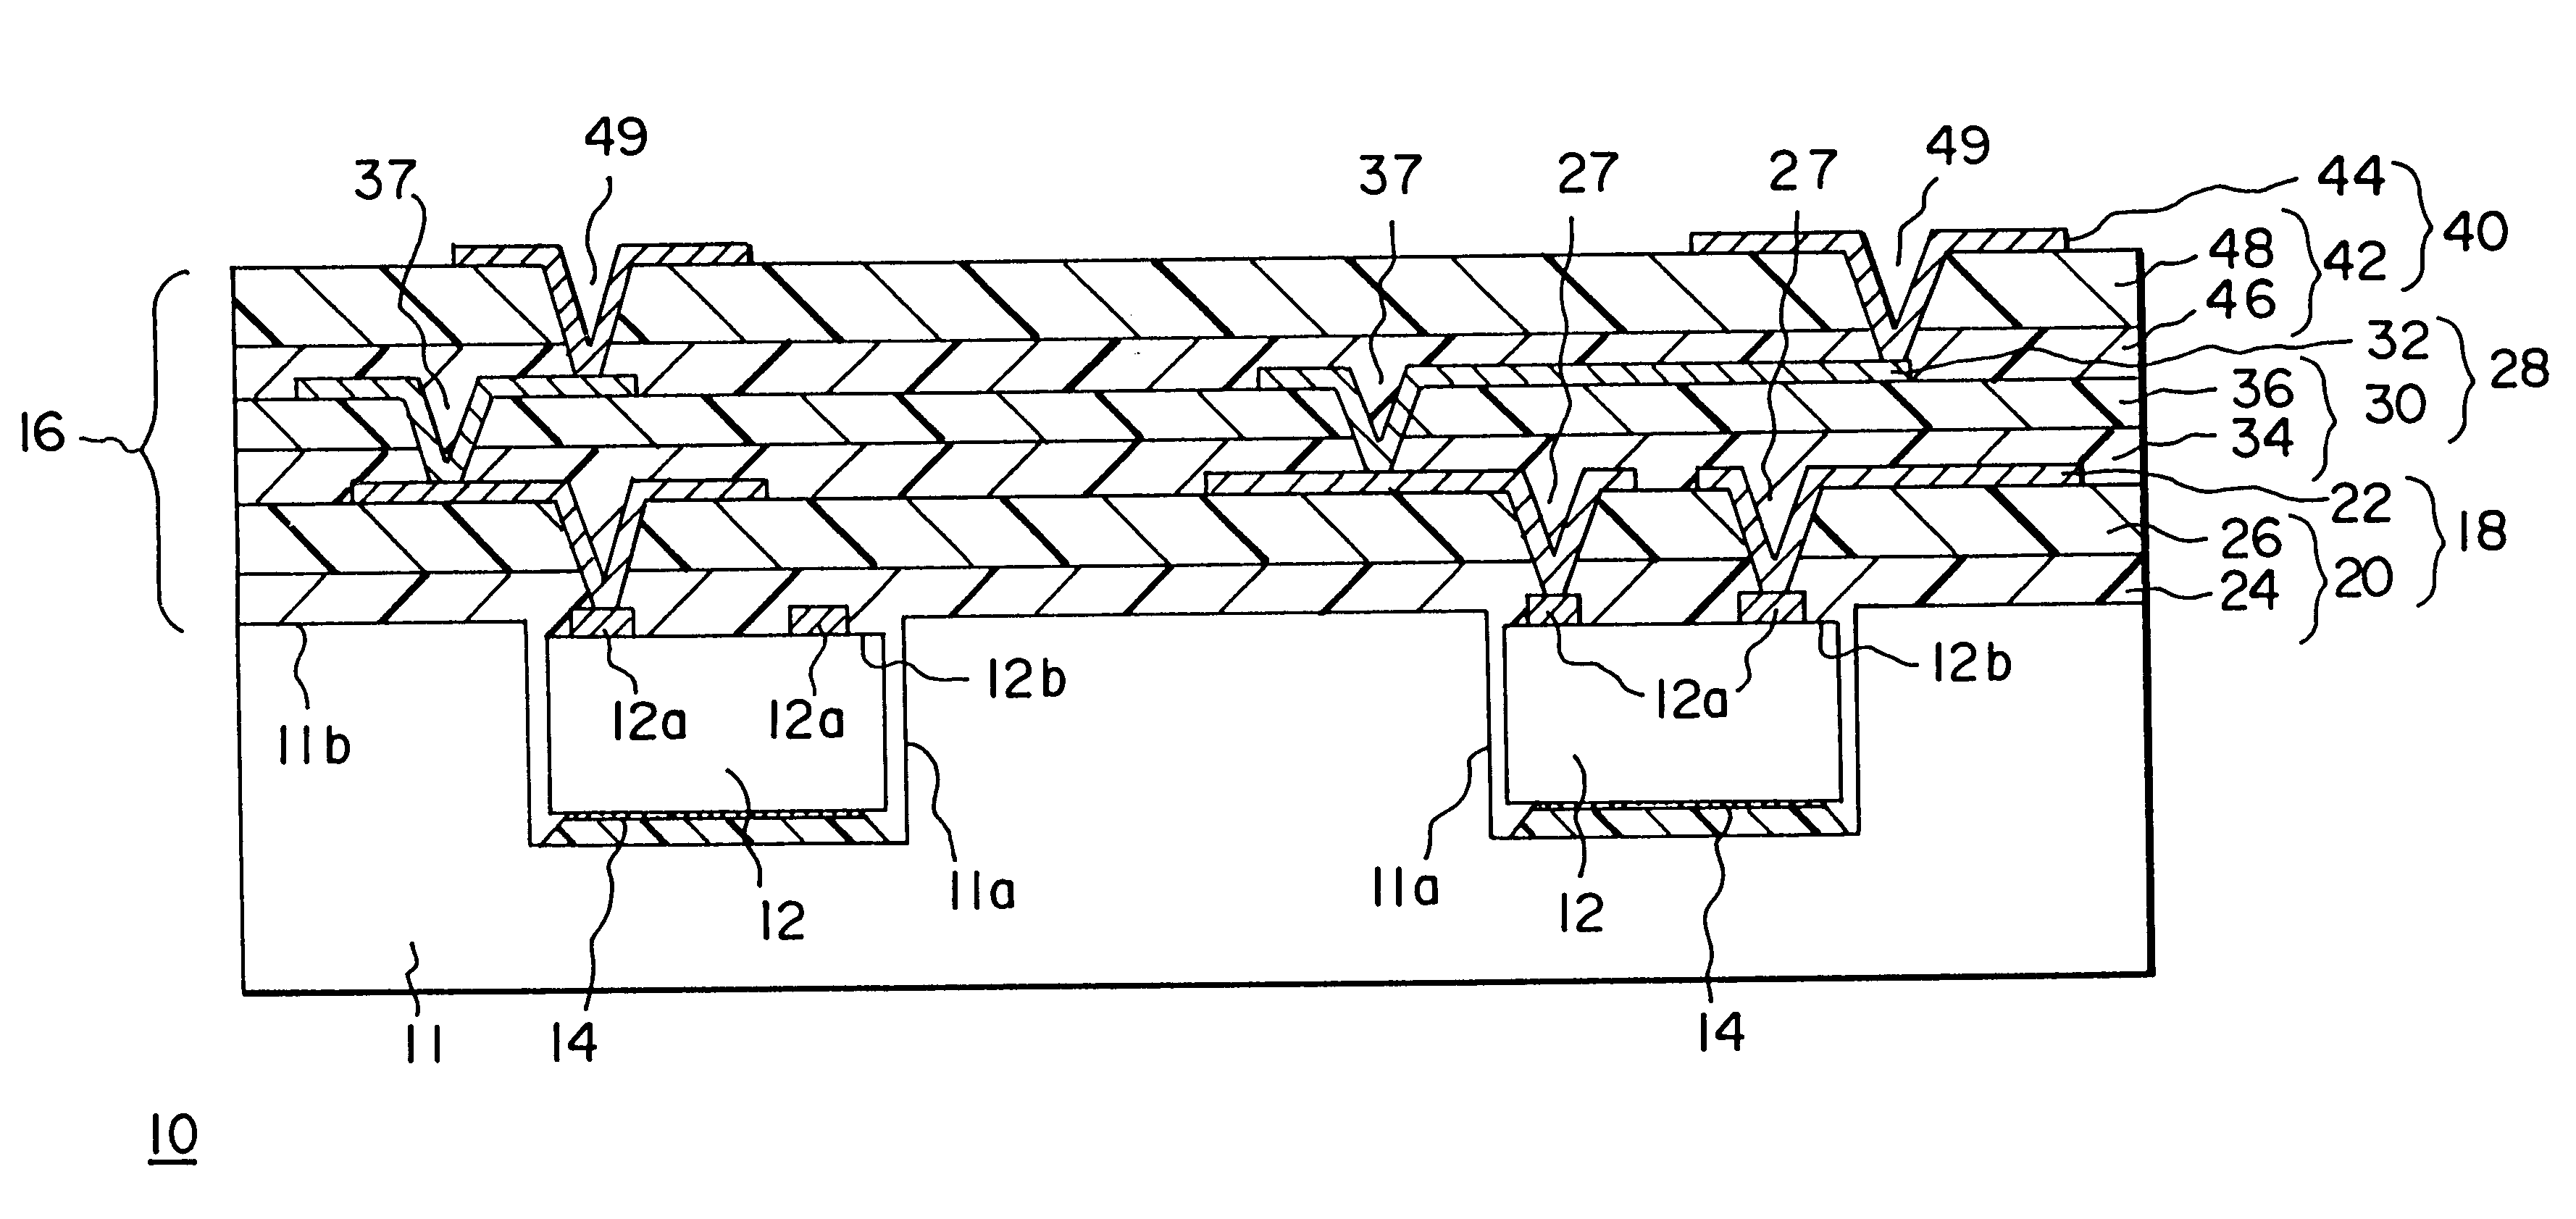 Electronics module having high density interconnect structures incorporating an improved dielectric lamination adhesive